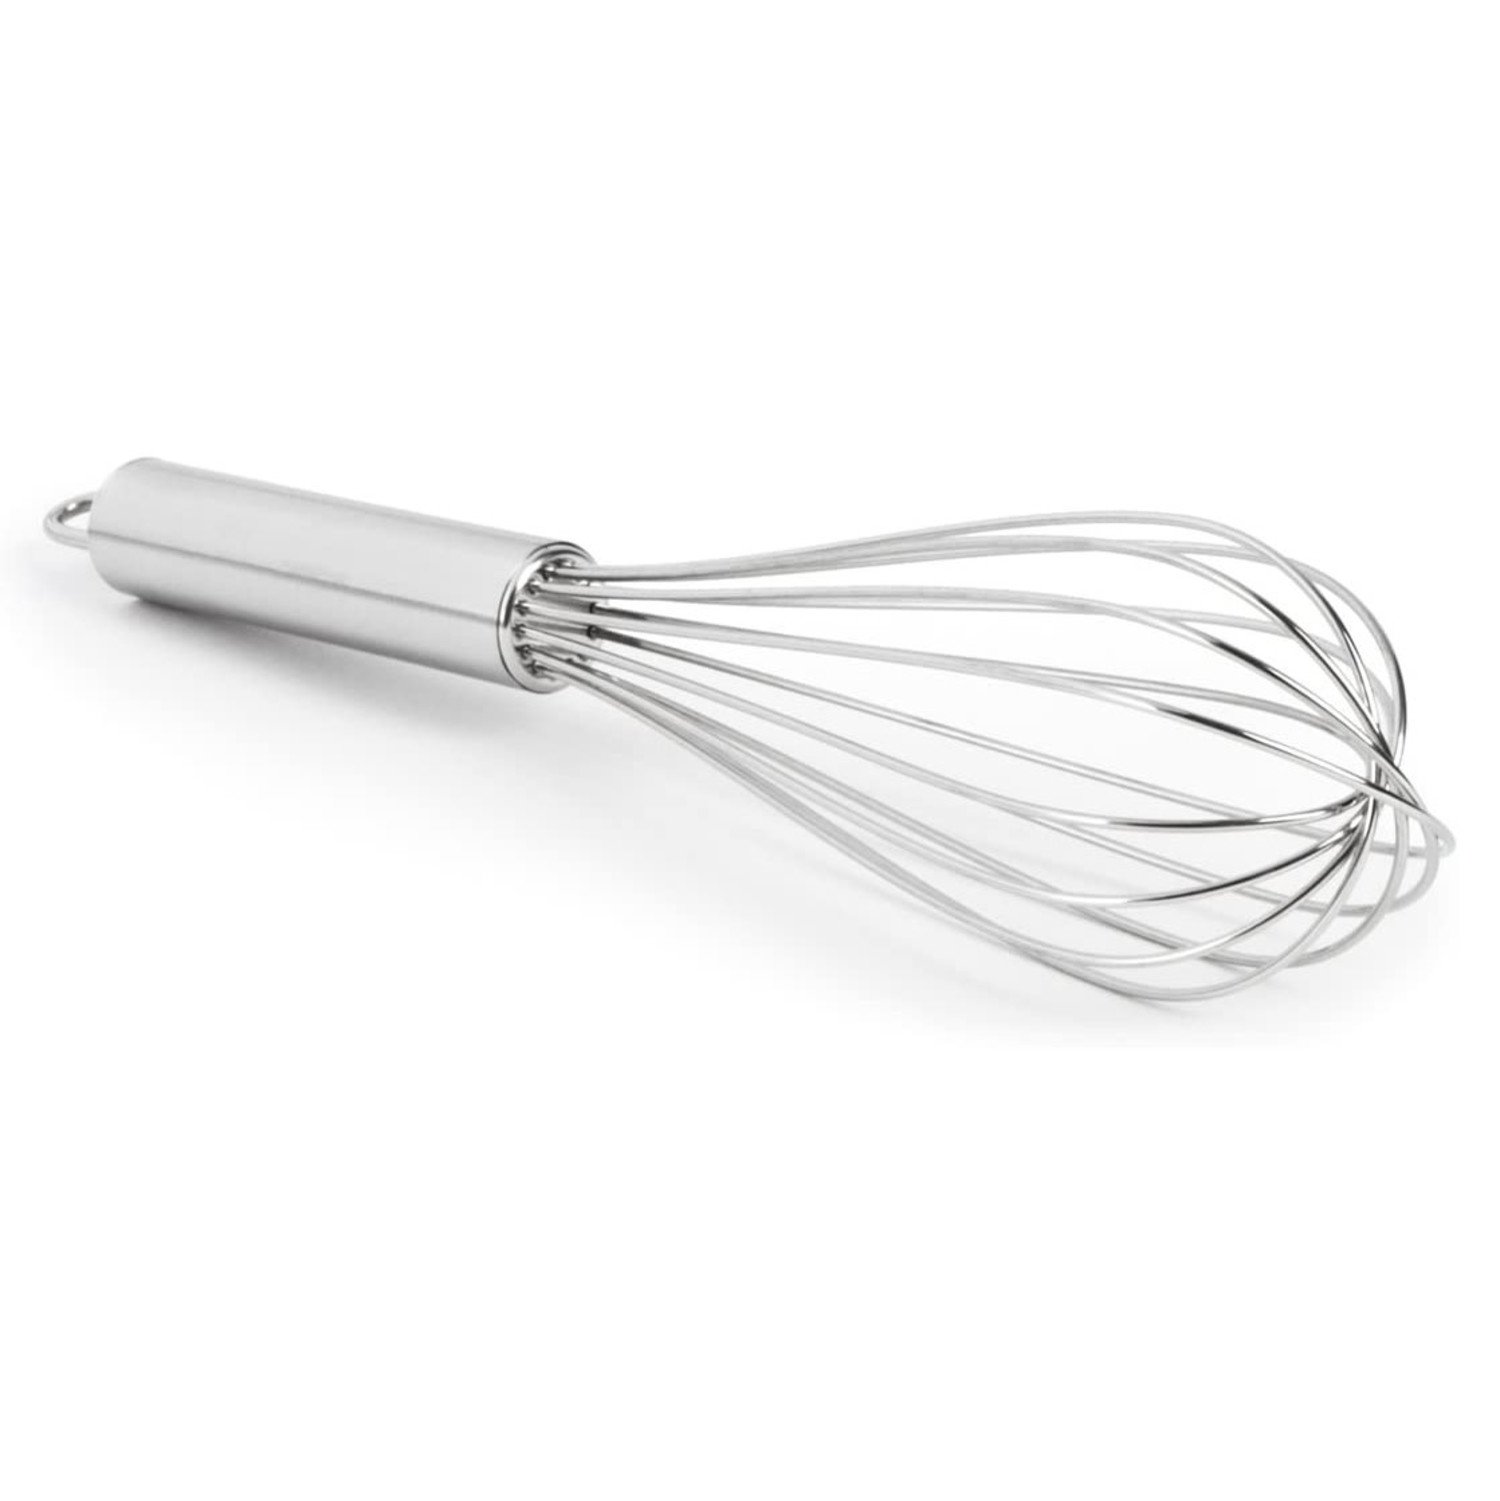 ExcelSteel 8 in. Professional Stainless Steel Heavy Duty Whisk